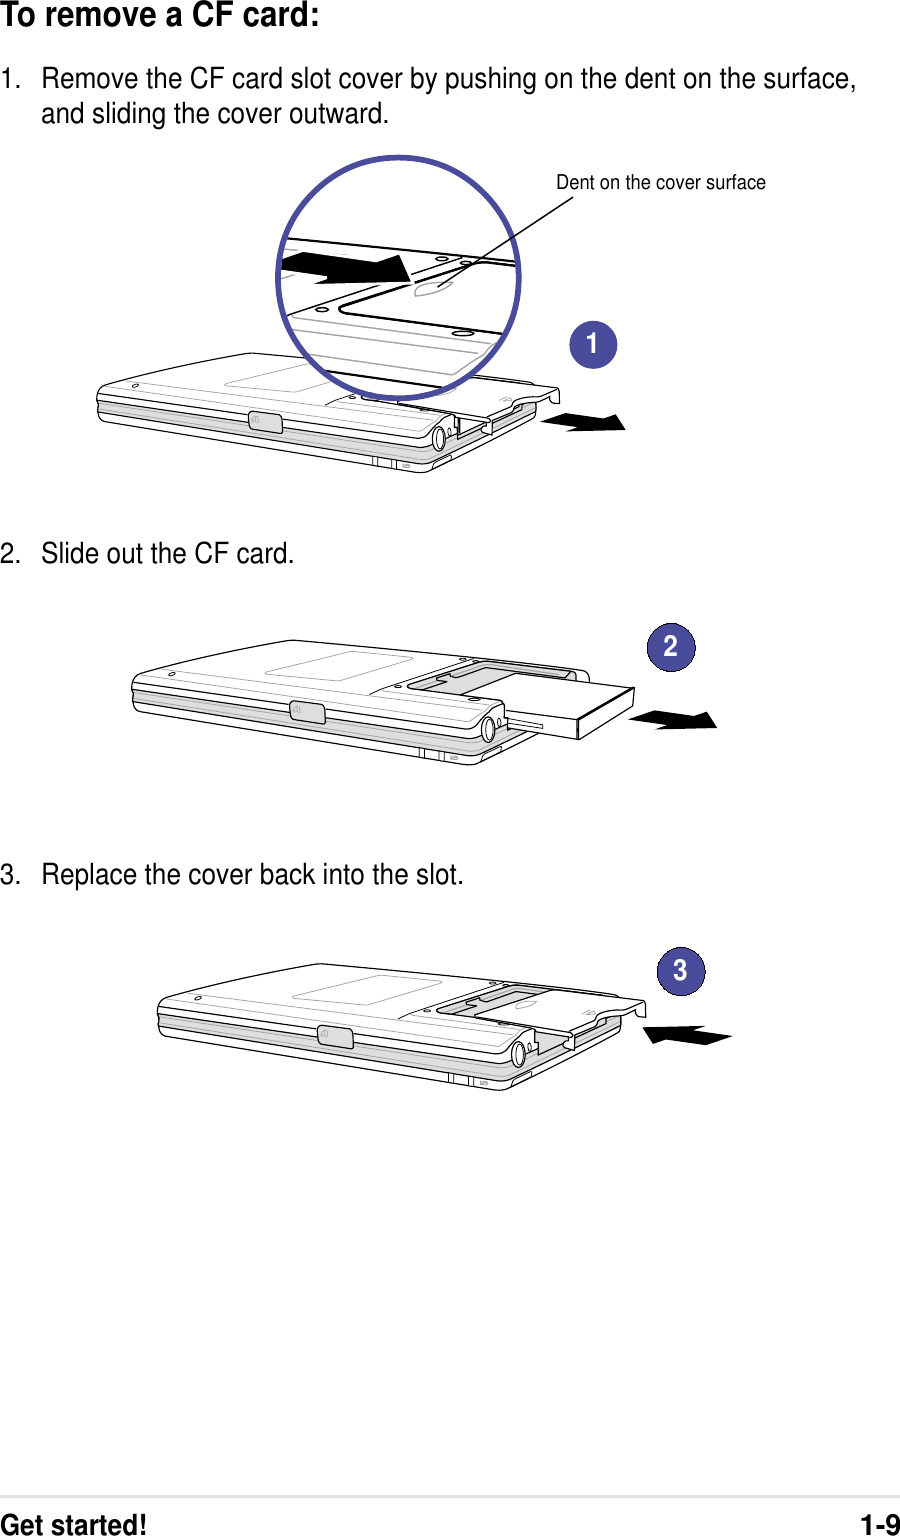 Get started!1-9To remove a CF card:1. Remove the CF card slot cover by pushing on the dent on the surface,and sliding the cover outward.2. Slide out the CF card.3. Replace the cover back into the slot.Dent on the cover surface123